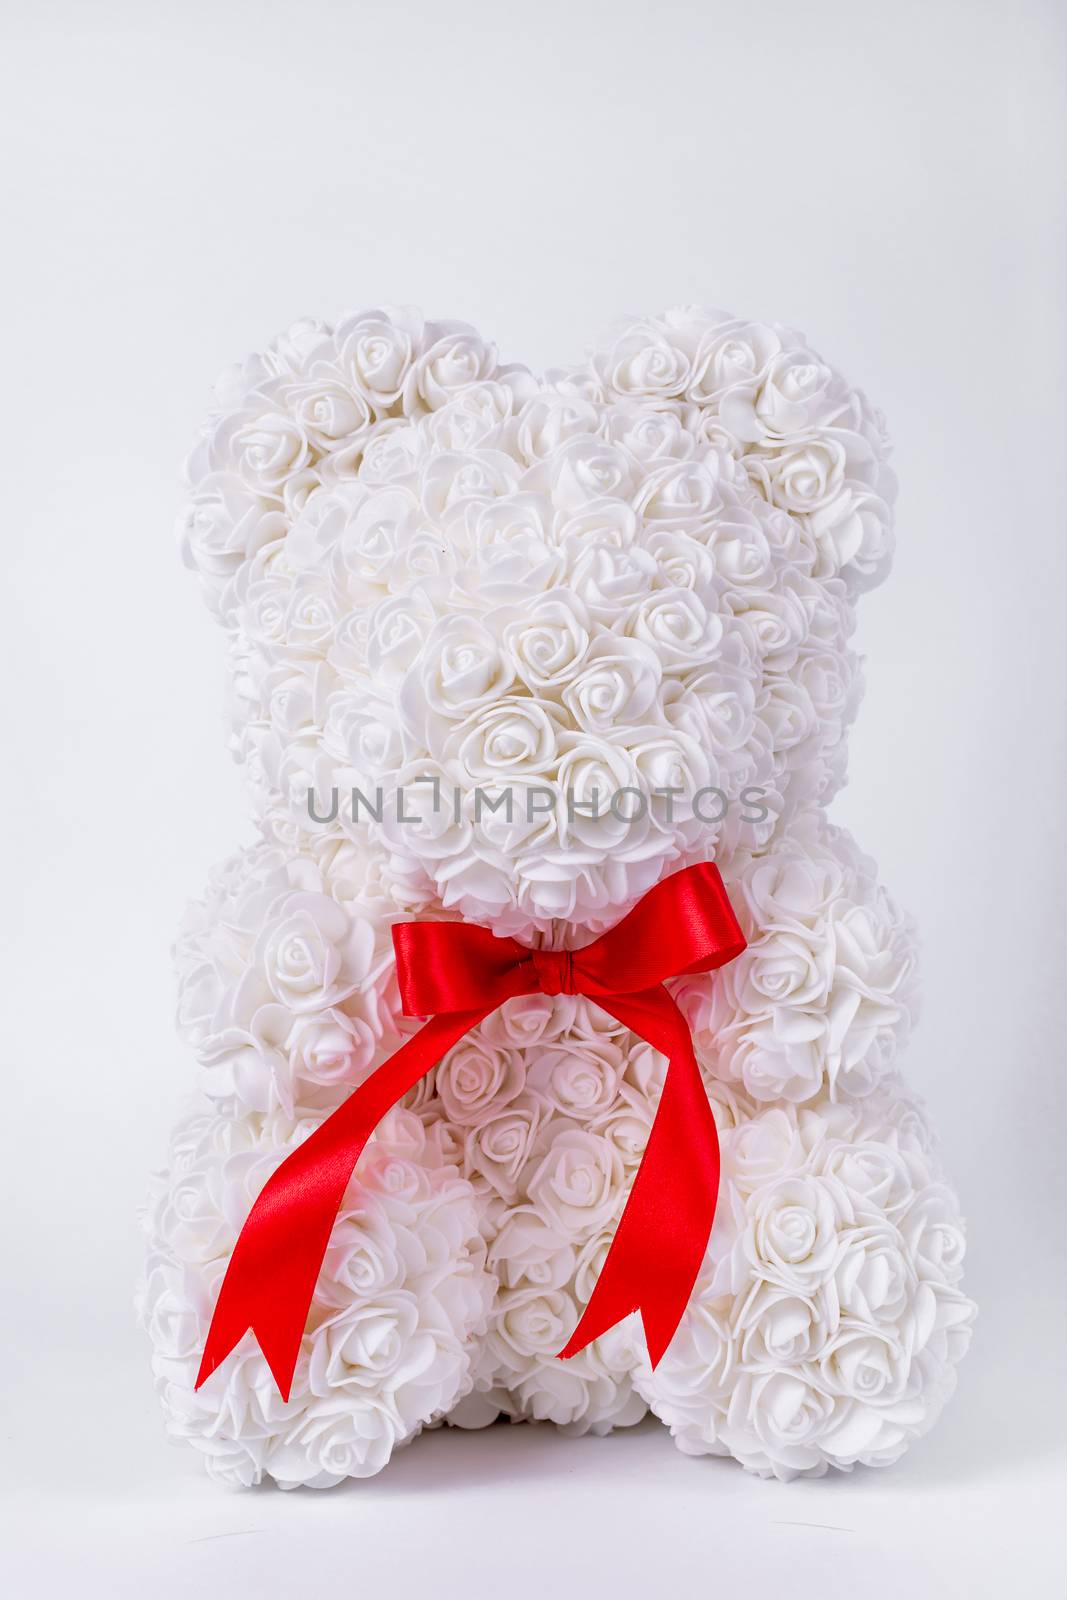 White teddy bear toy of foamirane roses. Red stripe on teddy neck. Stock photo isolated on white background. Gift on holiday for women. by alexsdriver